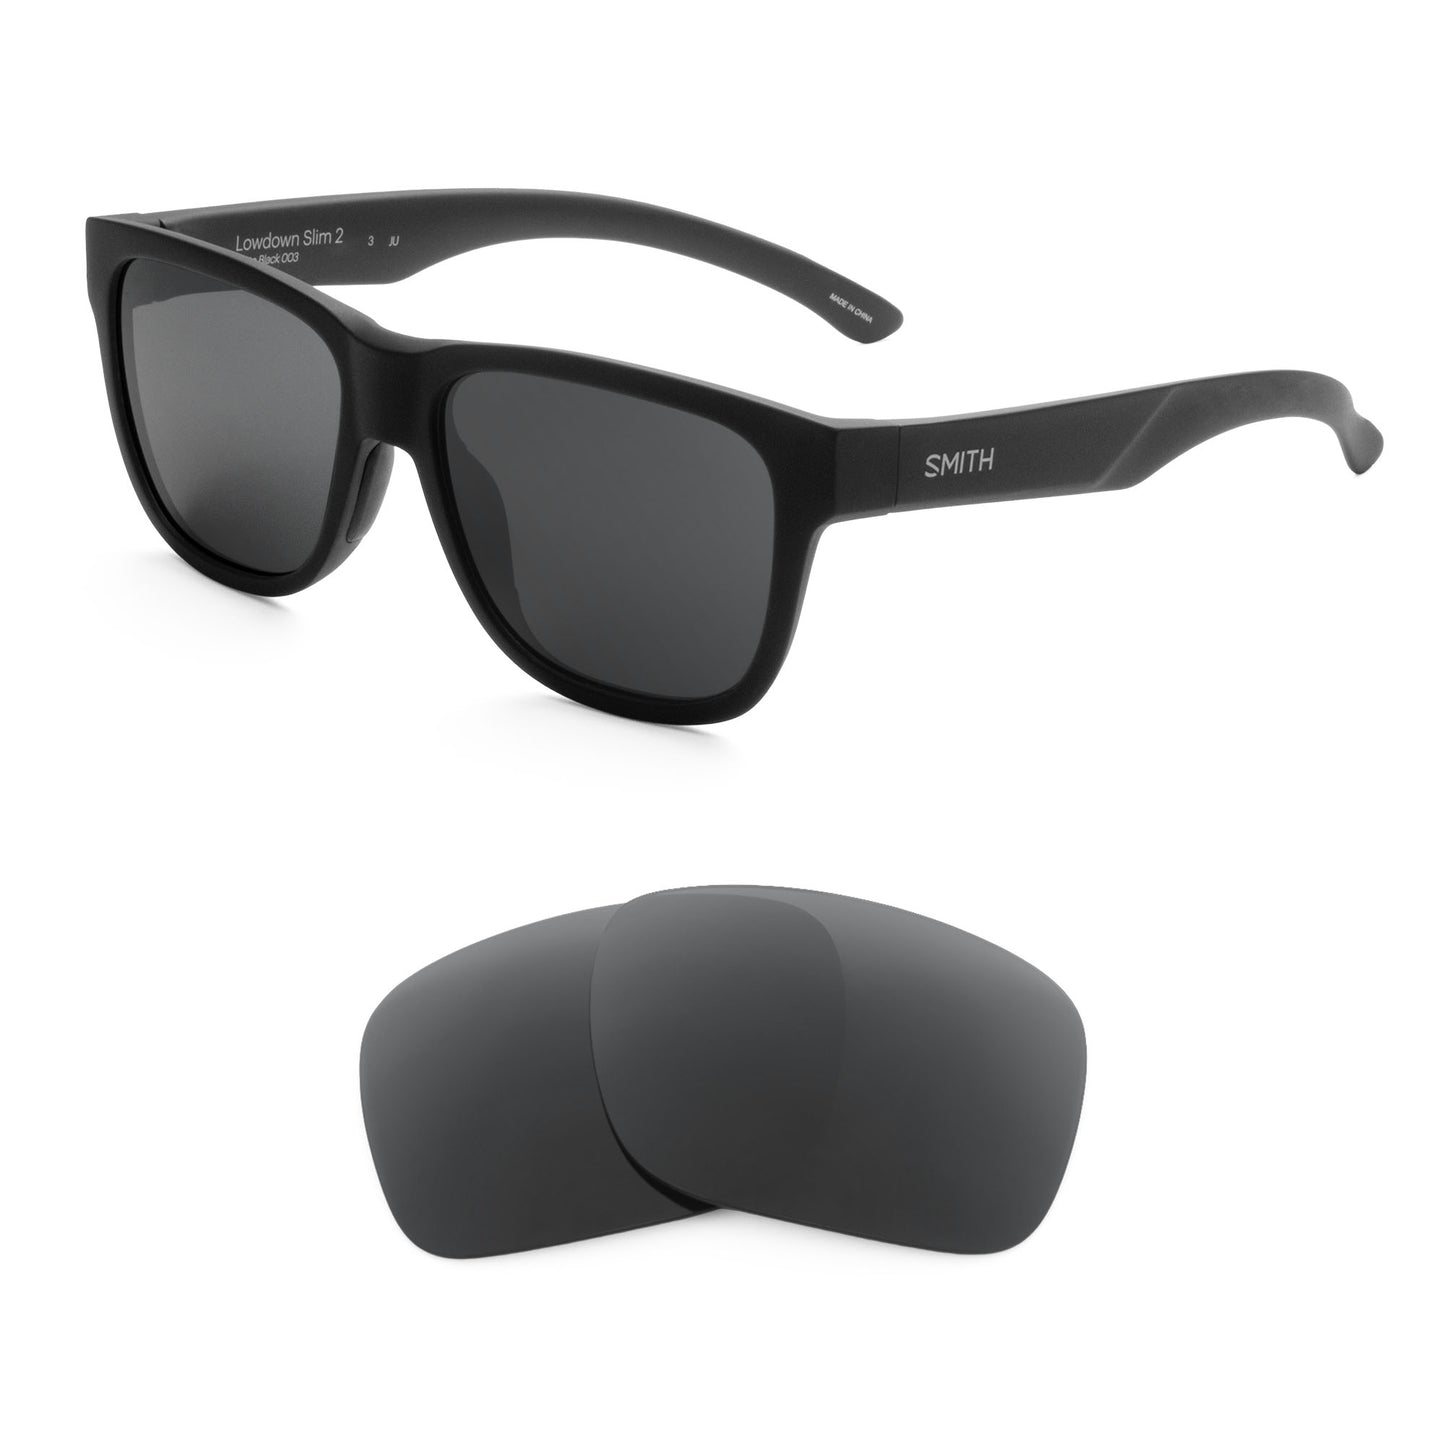 Smith Lowdown Slim 2 sunglasses with replacement lenses